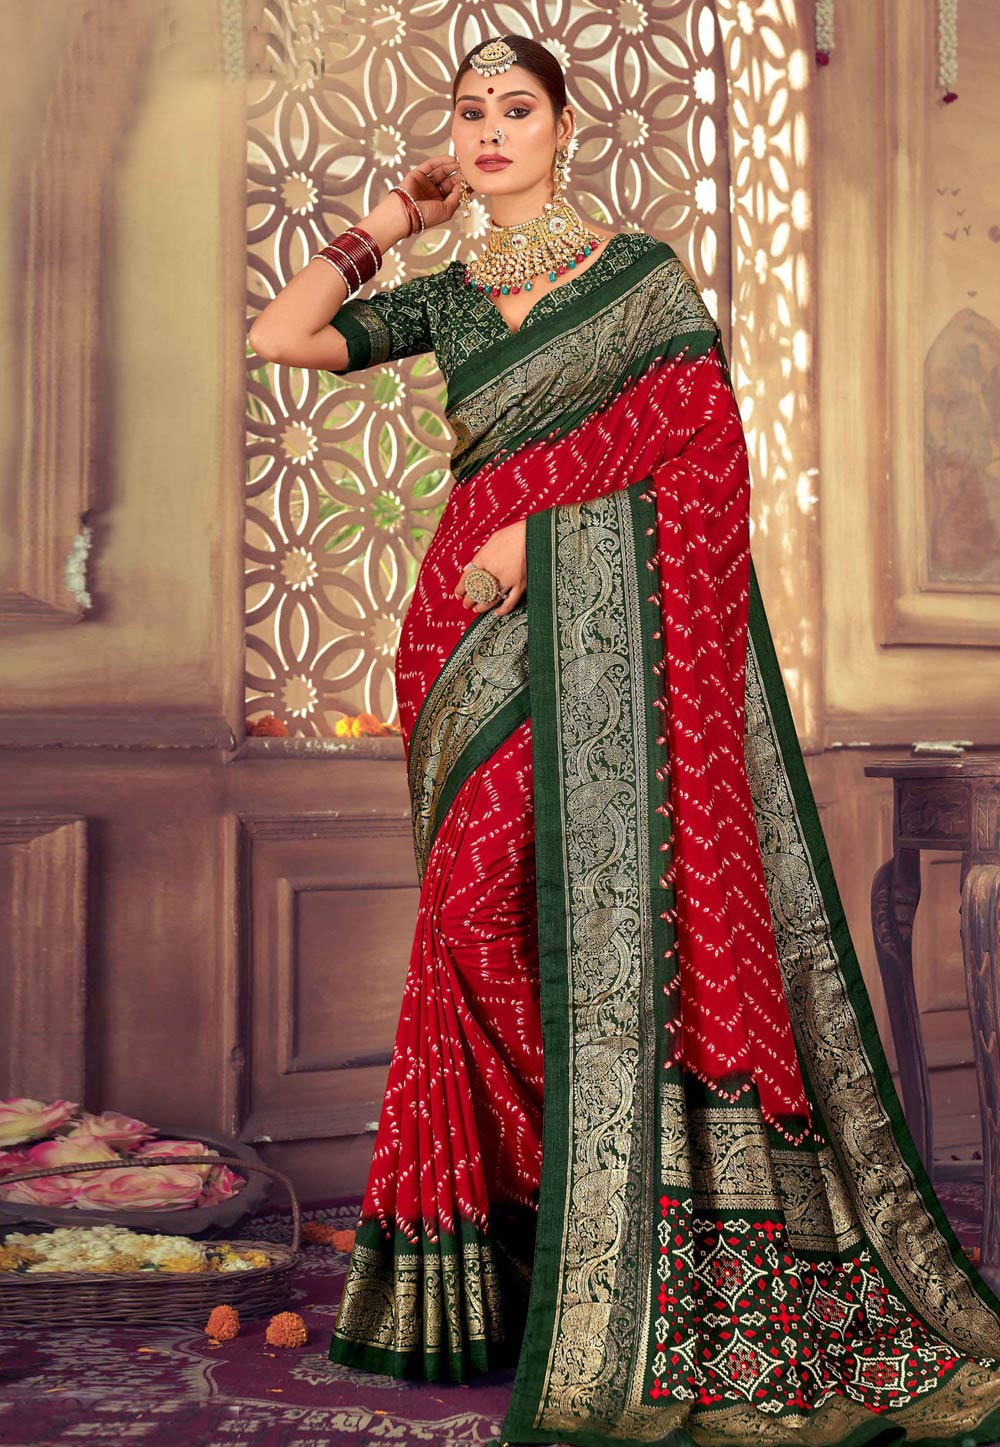 Can I wear a green blouse with a designer red saree? - Quora